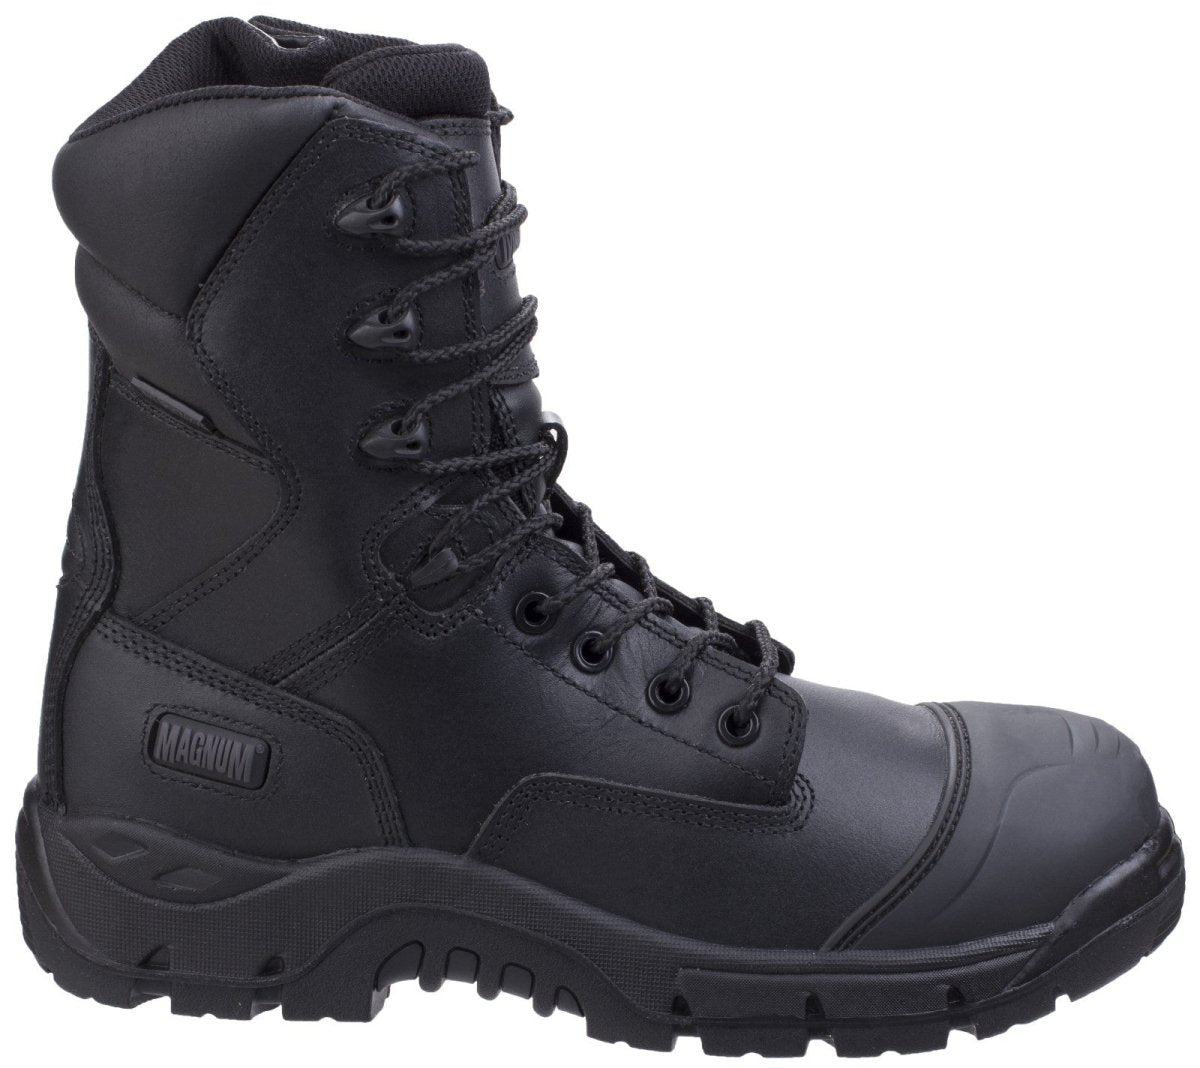 Magnum Rigmaster Waterproof Side Zip Hi-Leg Mens Safety Boots - Shoe Store Direct